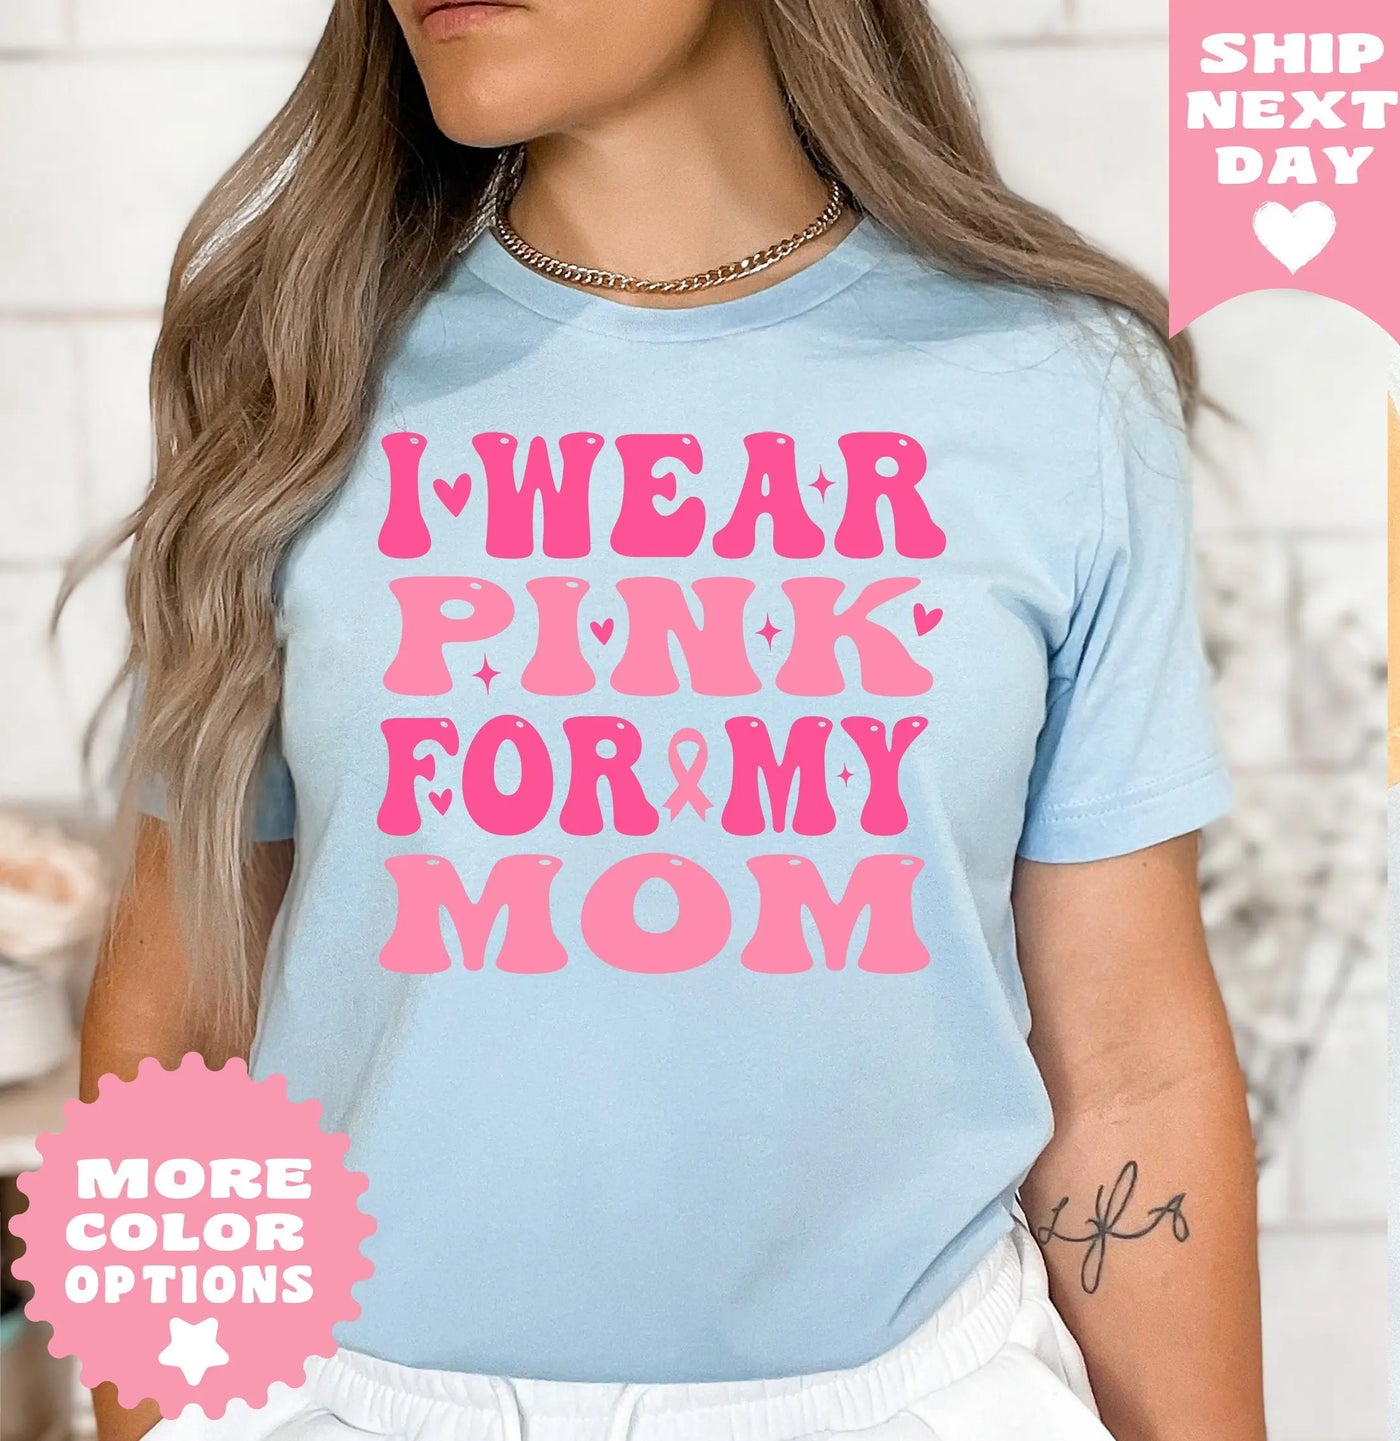 I Wear Pink For My Mom Shirt, Pink Ribbon Shirt, Breast Cancer Shirt, Cancer TShirt, Cancer Mom TShirt, Cancer Awareness, Cancer Support Tee Raveloo